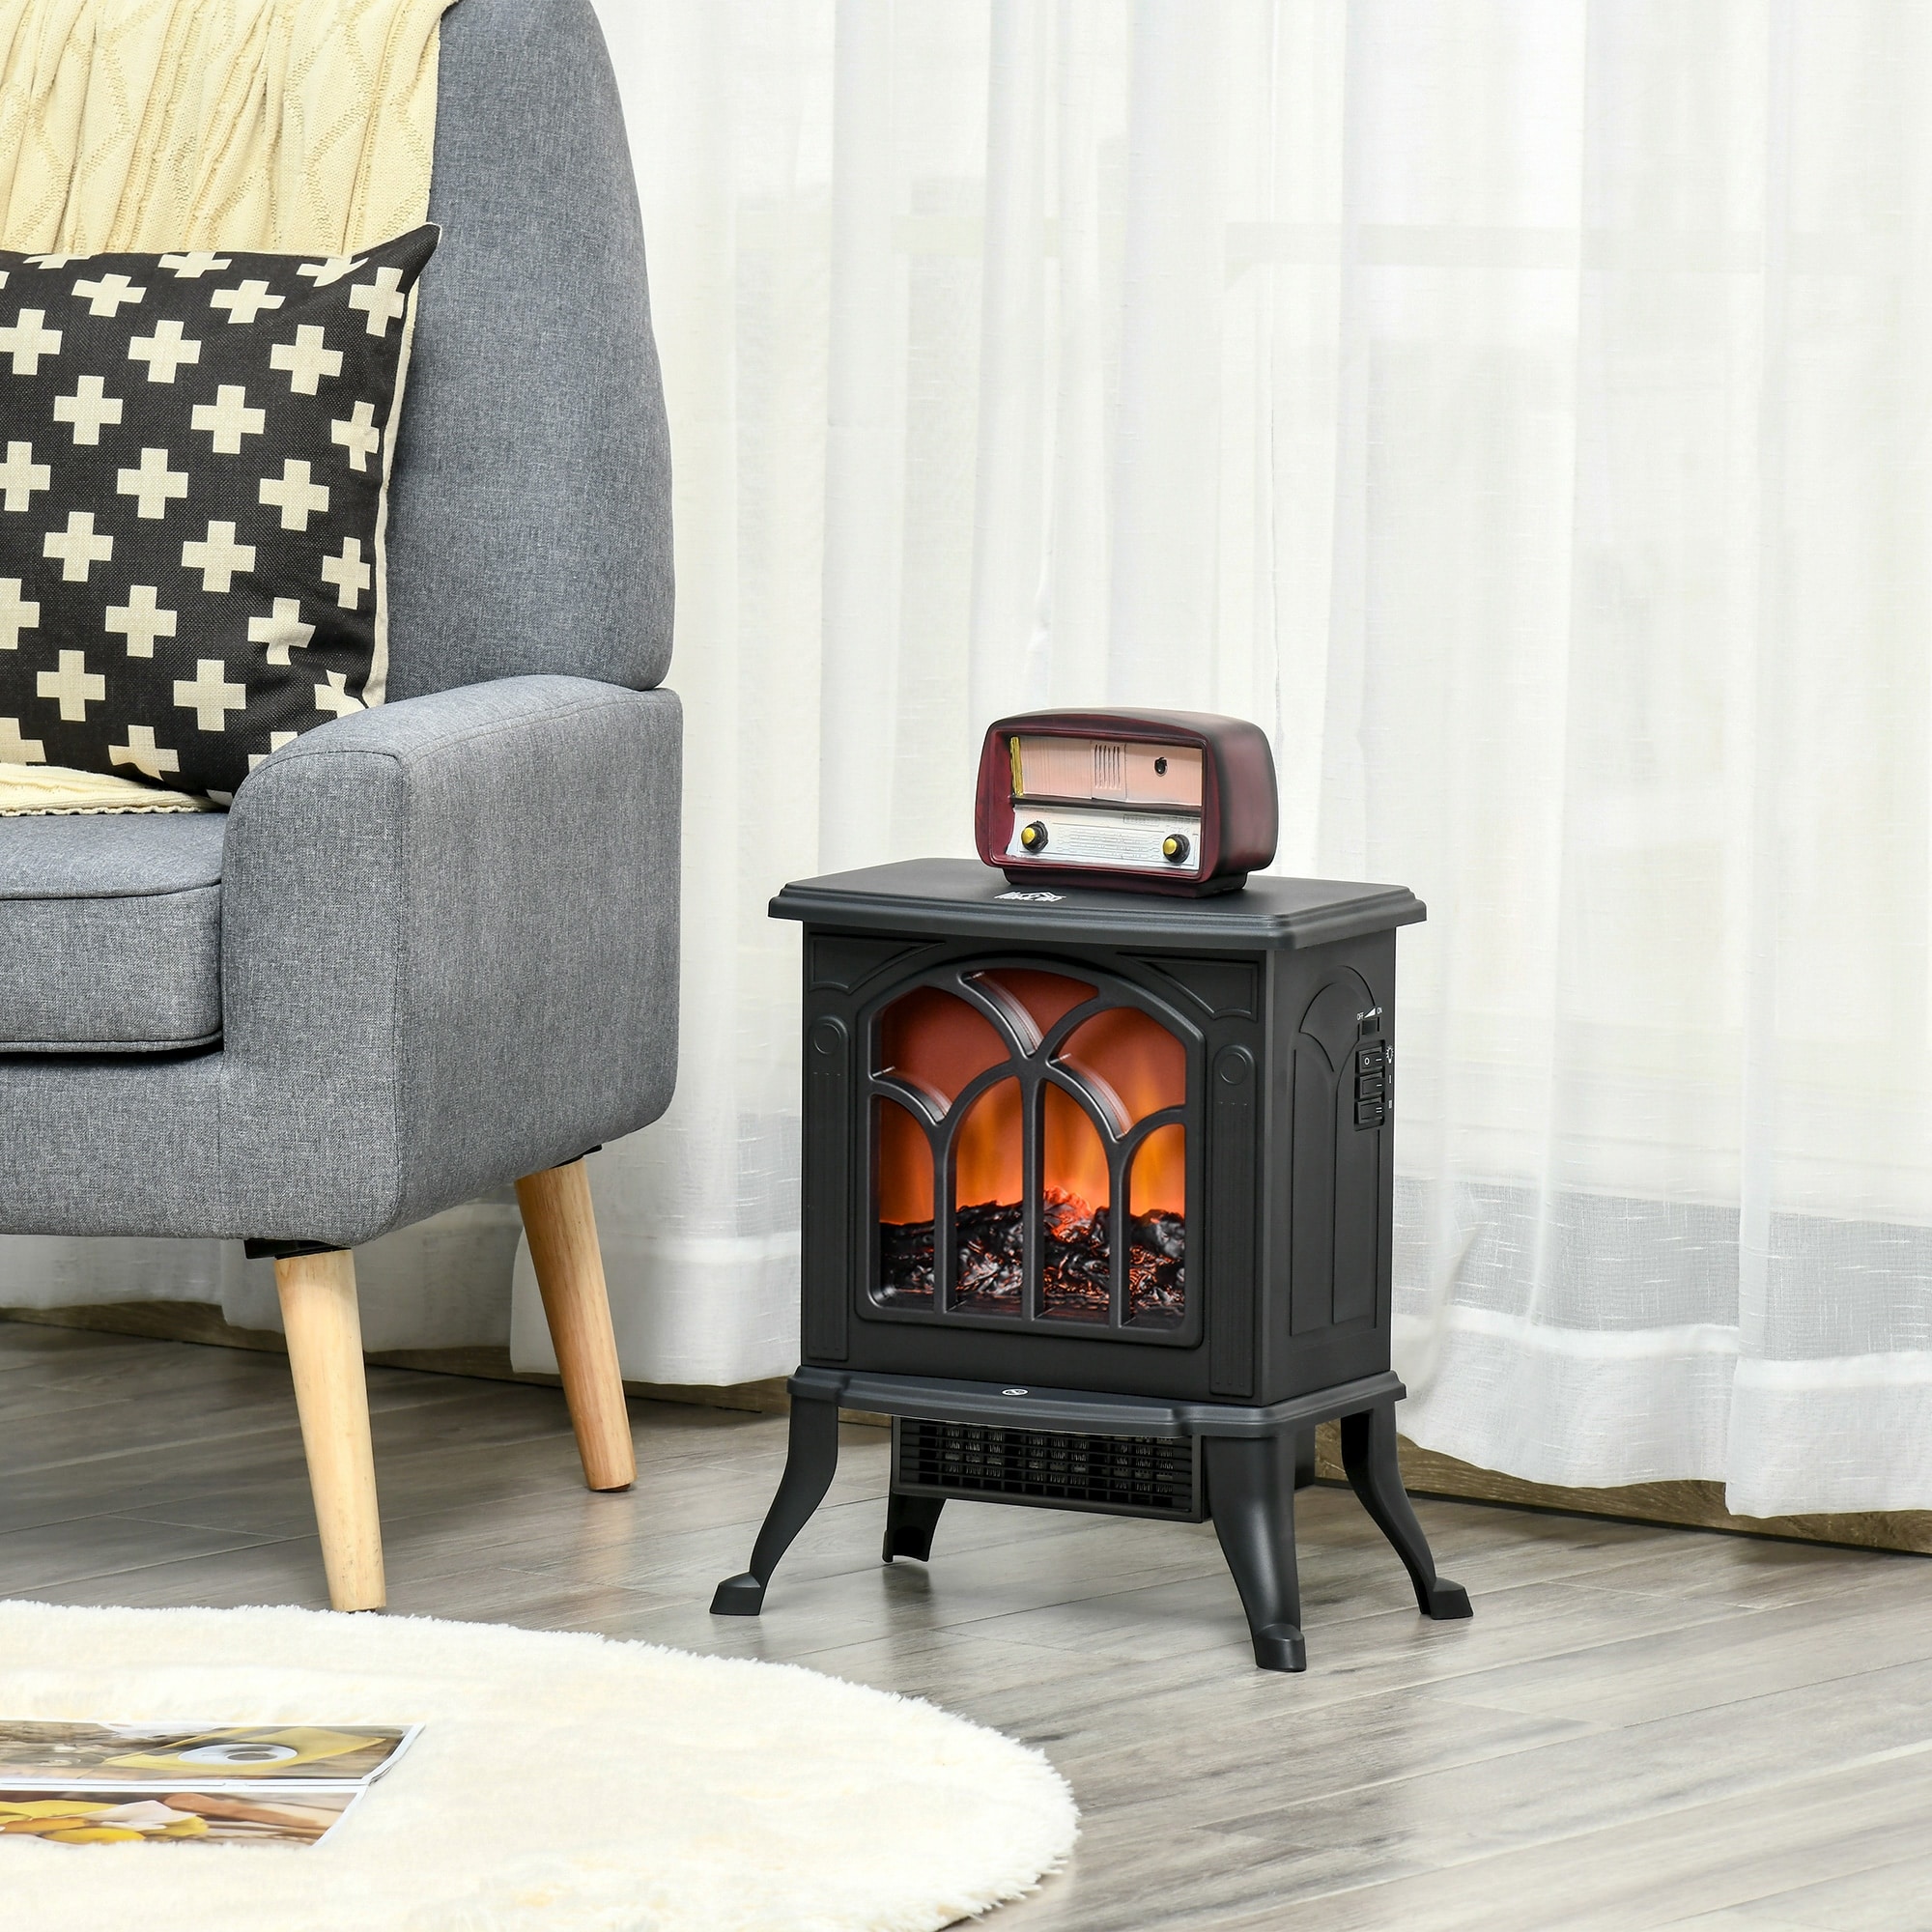 Mini Wood Stove Cast Iron Freestanding Manufacturers and Suppliers China -  Brands - Hi-Flame Metal